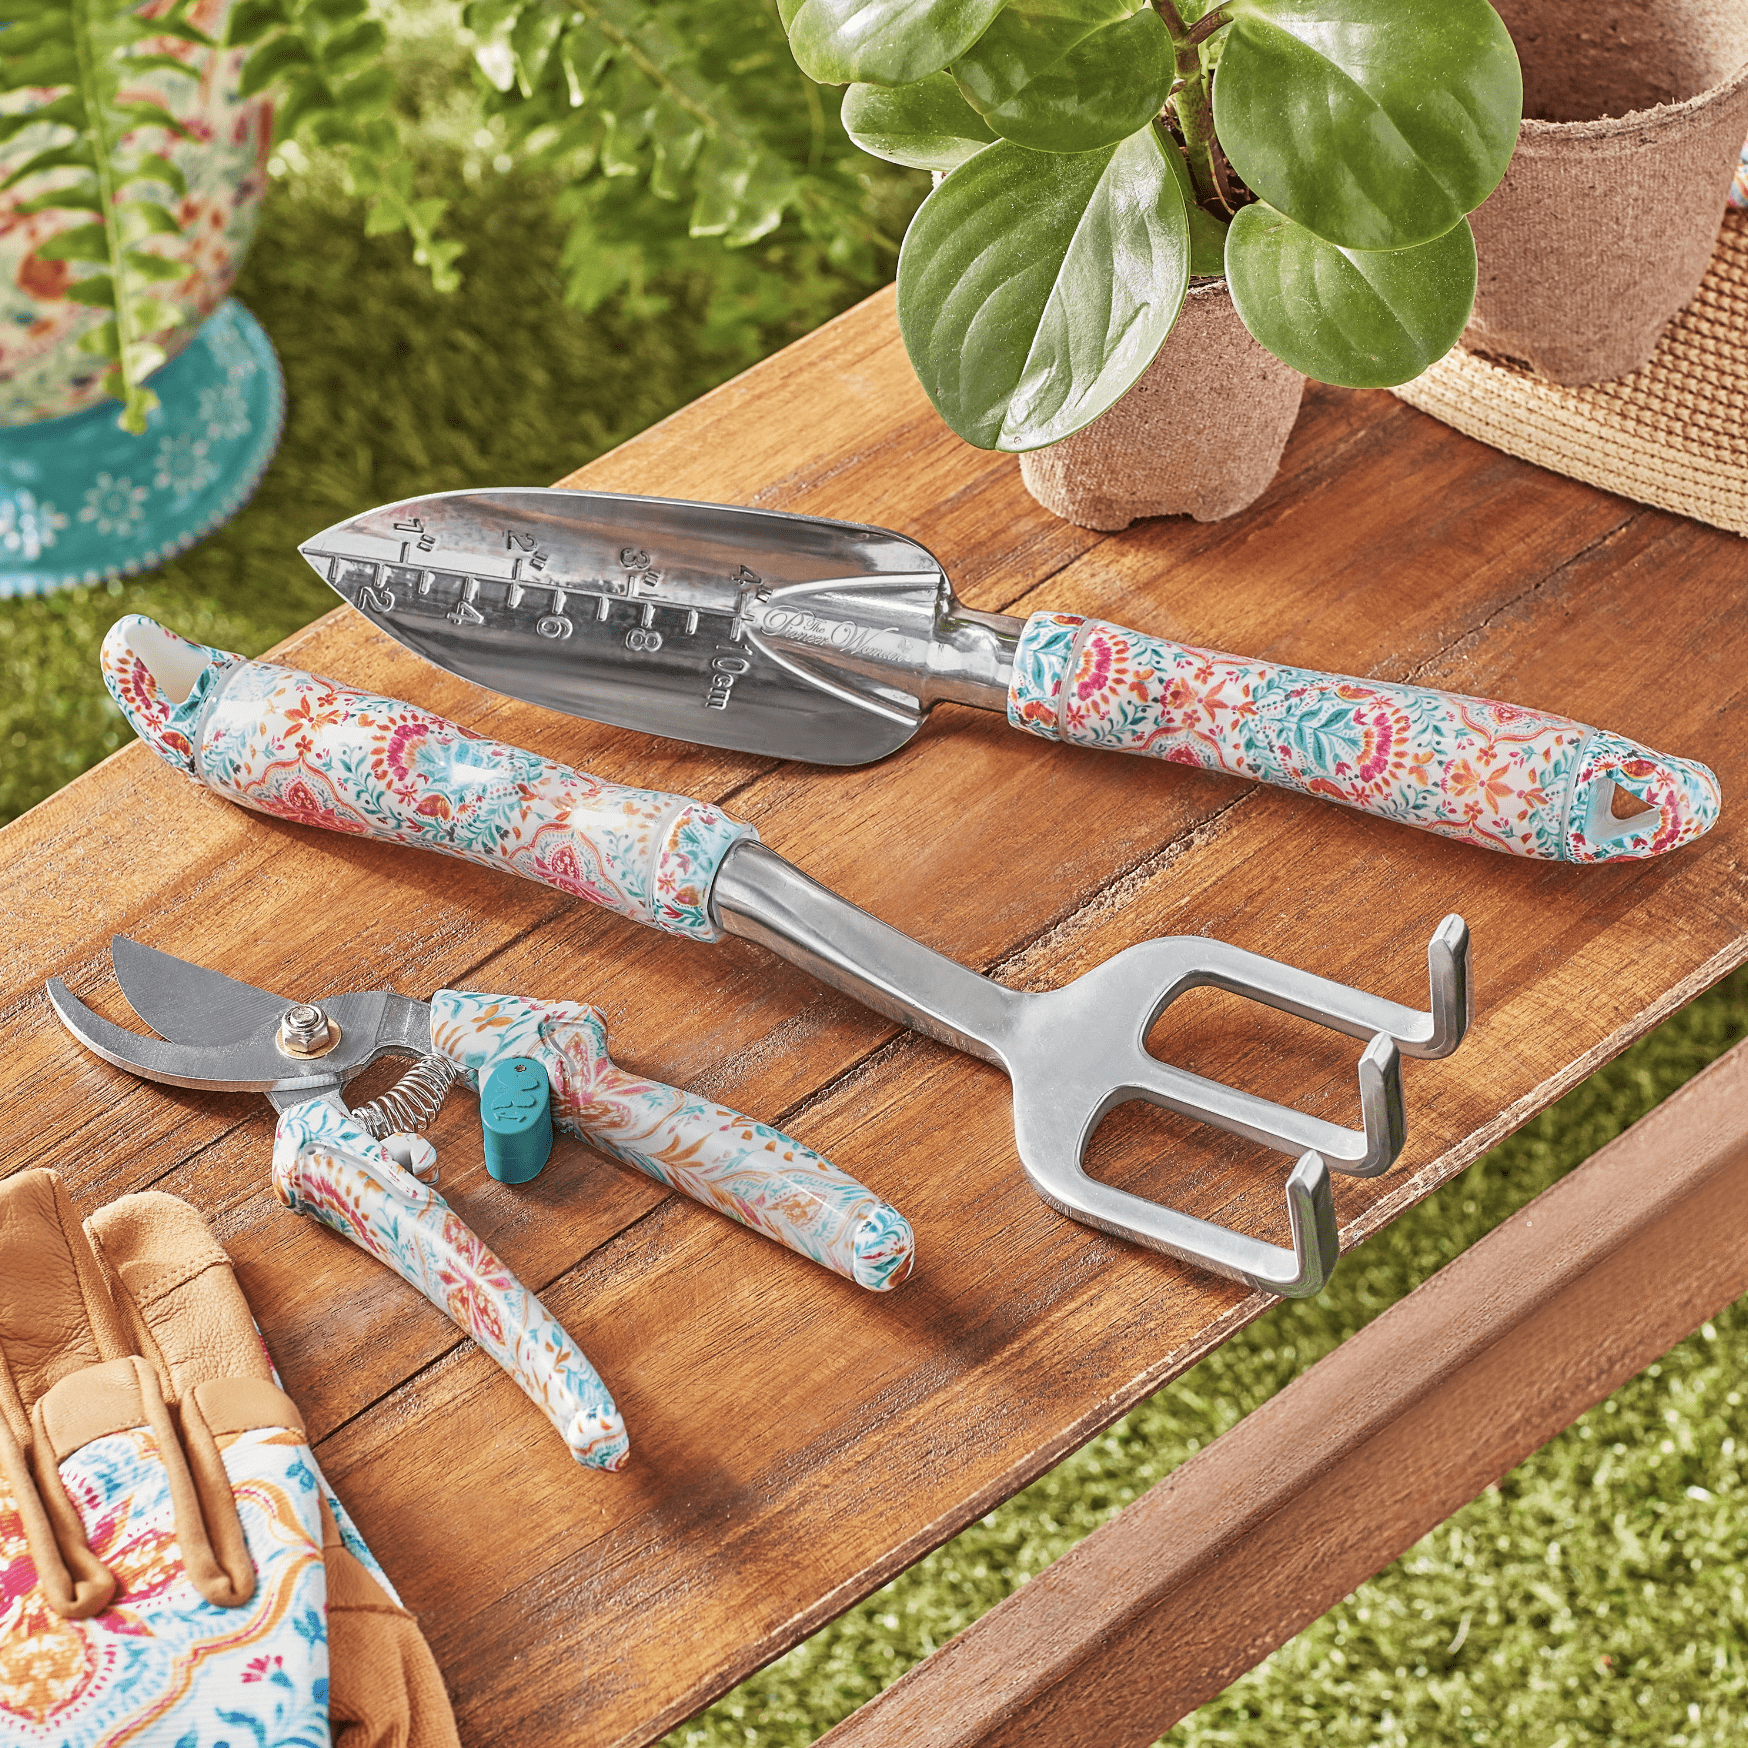 The Turquoise Floral Pioneer Woman Knife Block Set